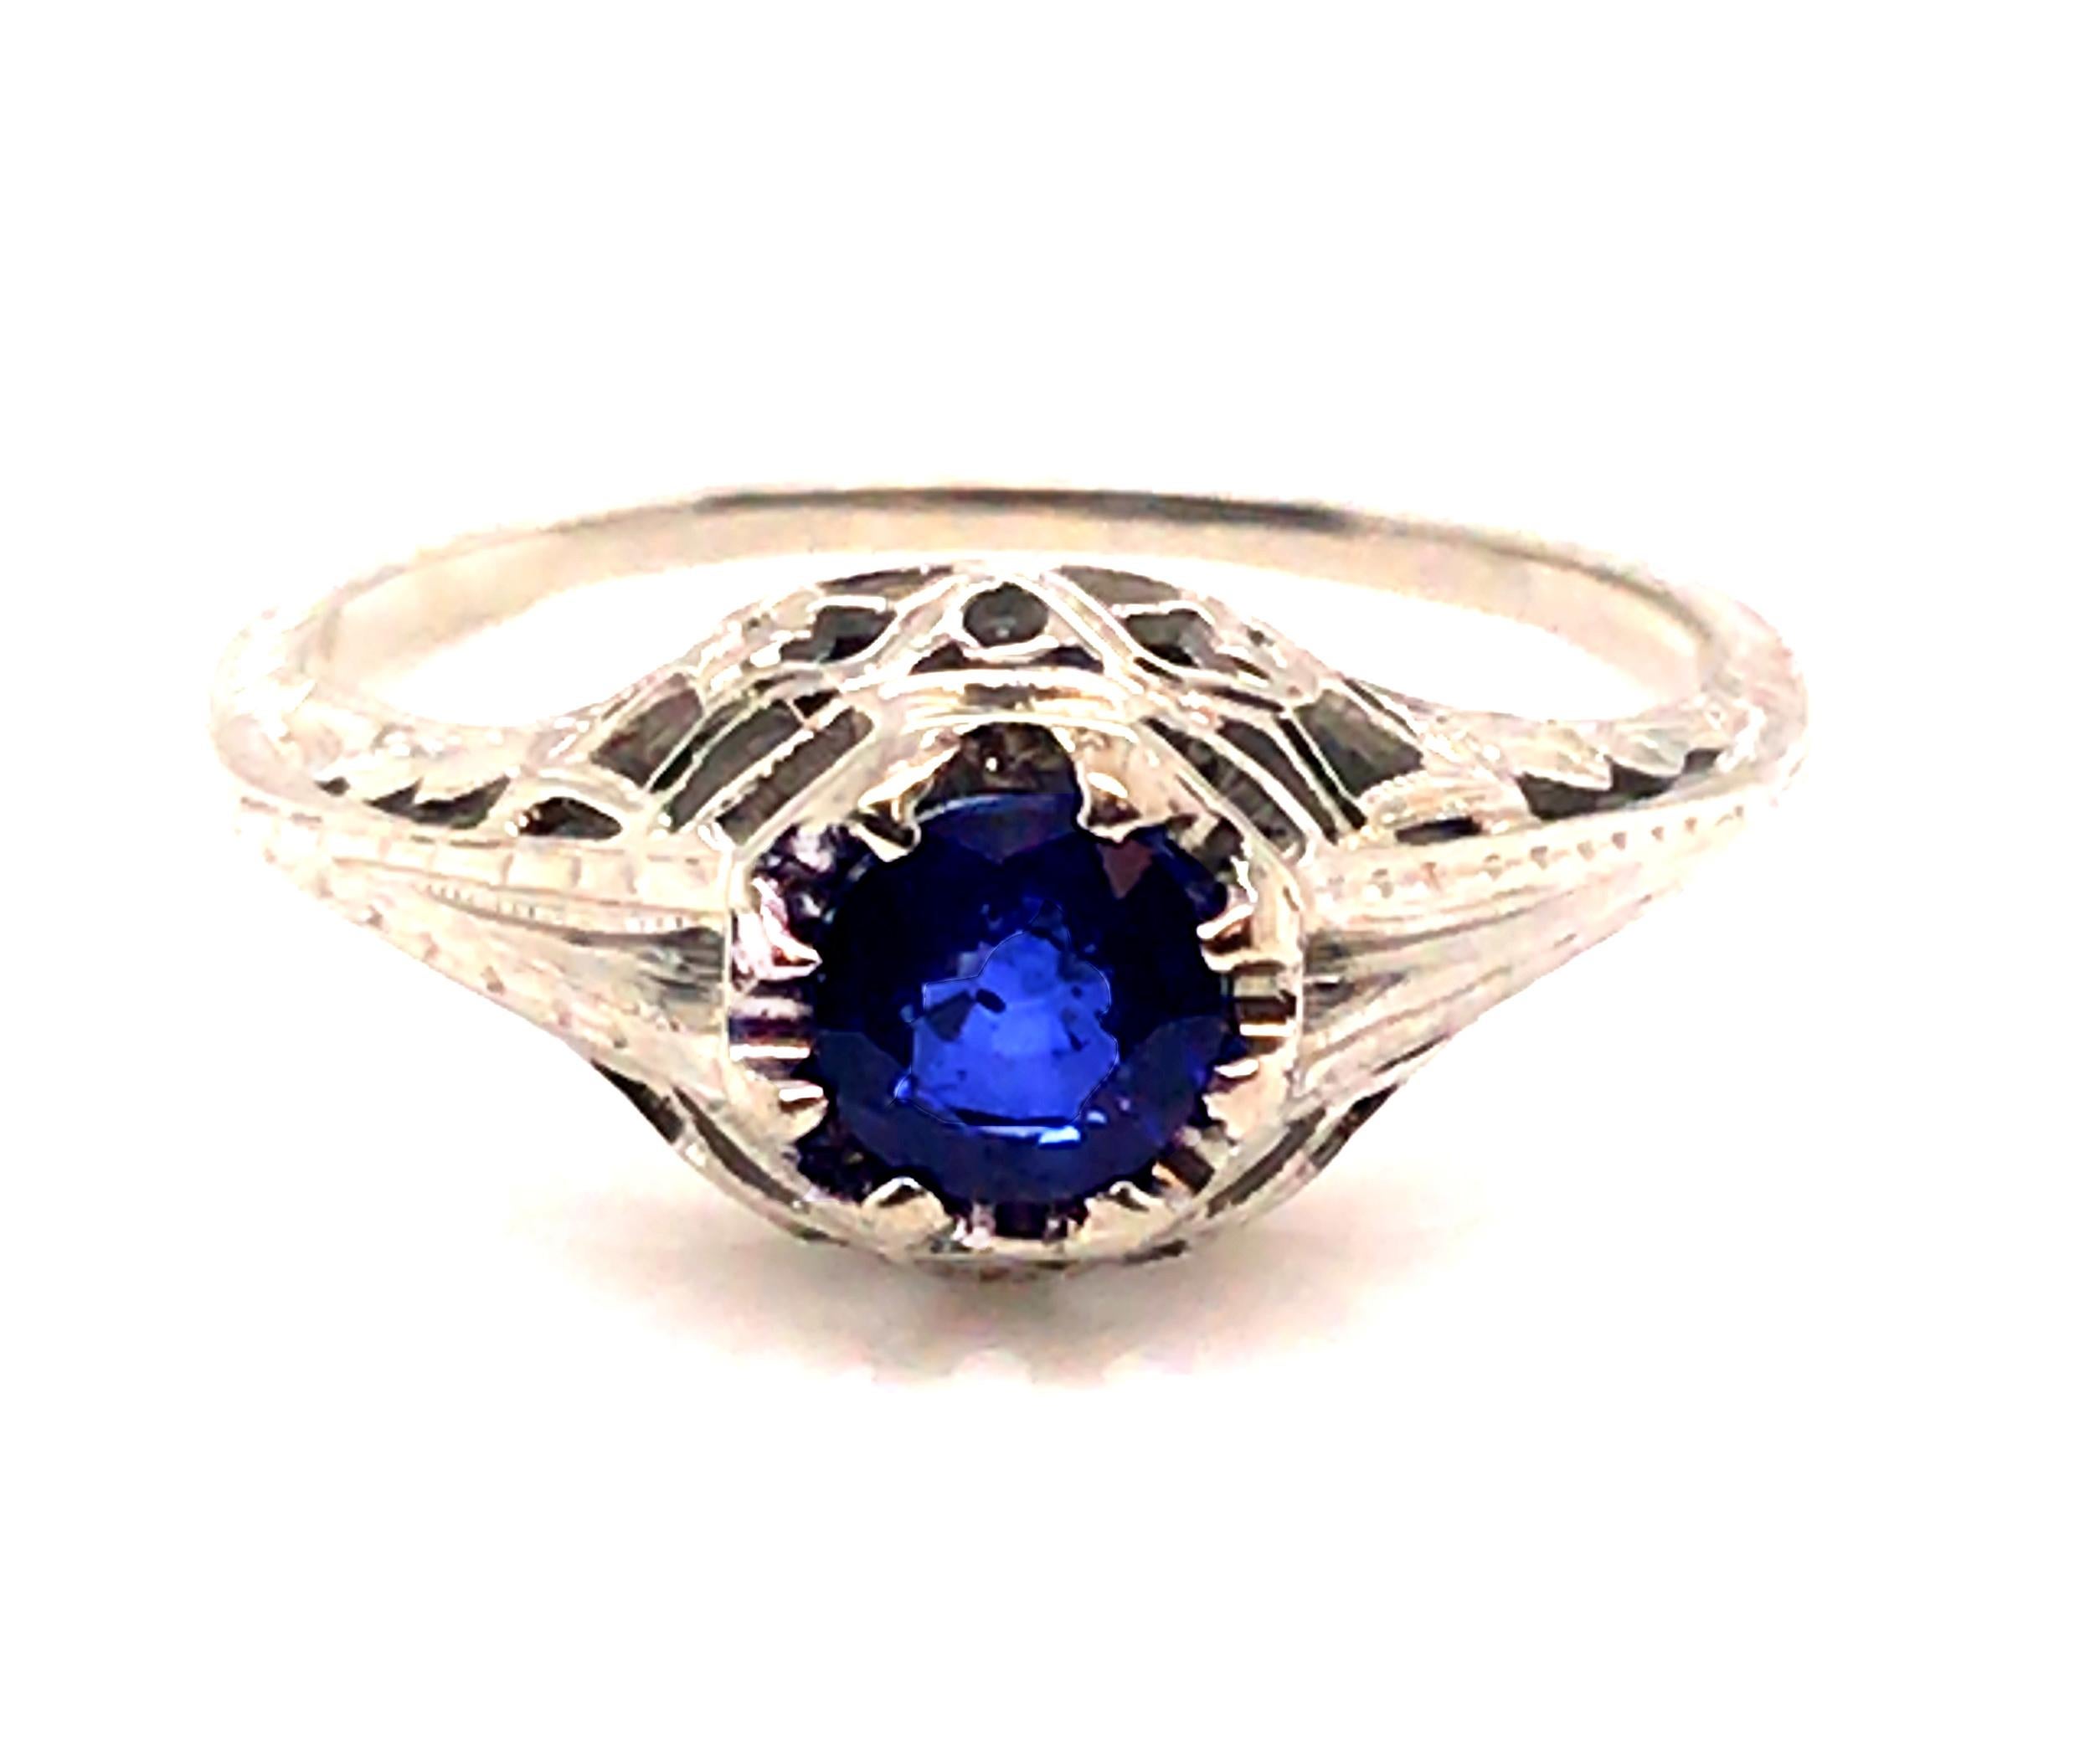 Genuine Original Antique Art Deco from the 1920's Vintage Sapphire Engagement Ring .60ct 18K Gold



Featuring a Lavish .60ct Sapphire Center

Sensational Radiance 

Exquisite Hand Carved Filigree 

Four Beautifully Hand Engraved Flowers

Hand